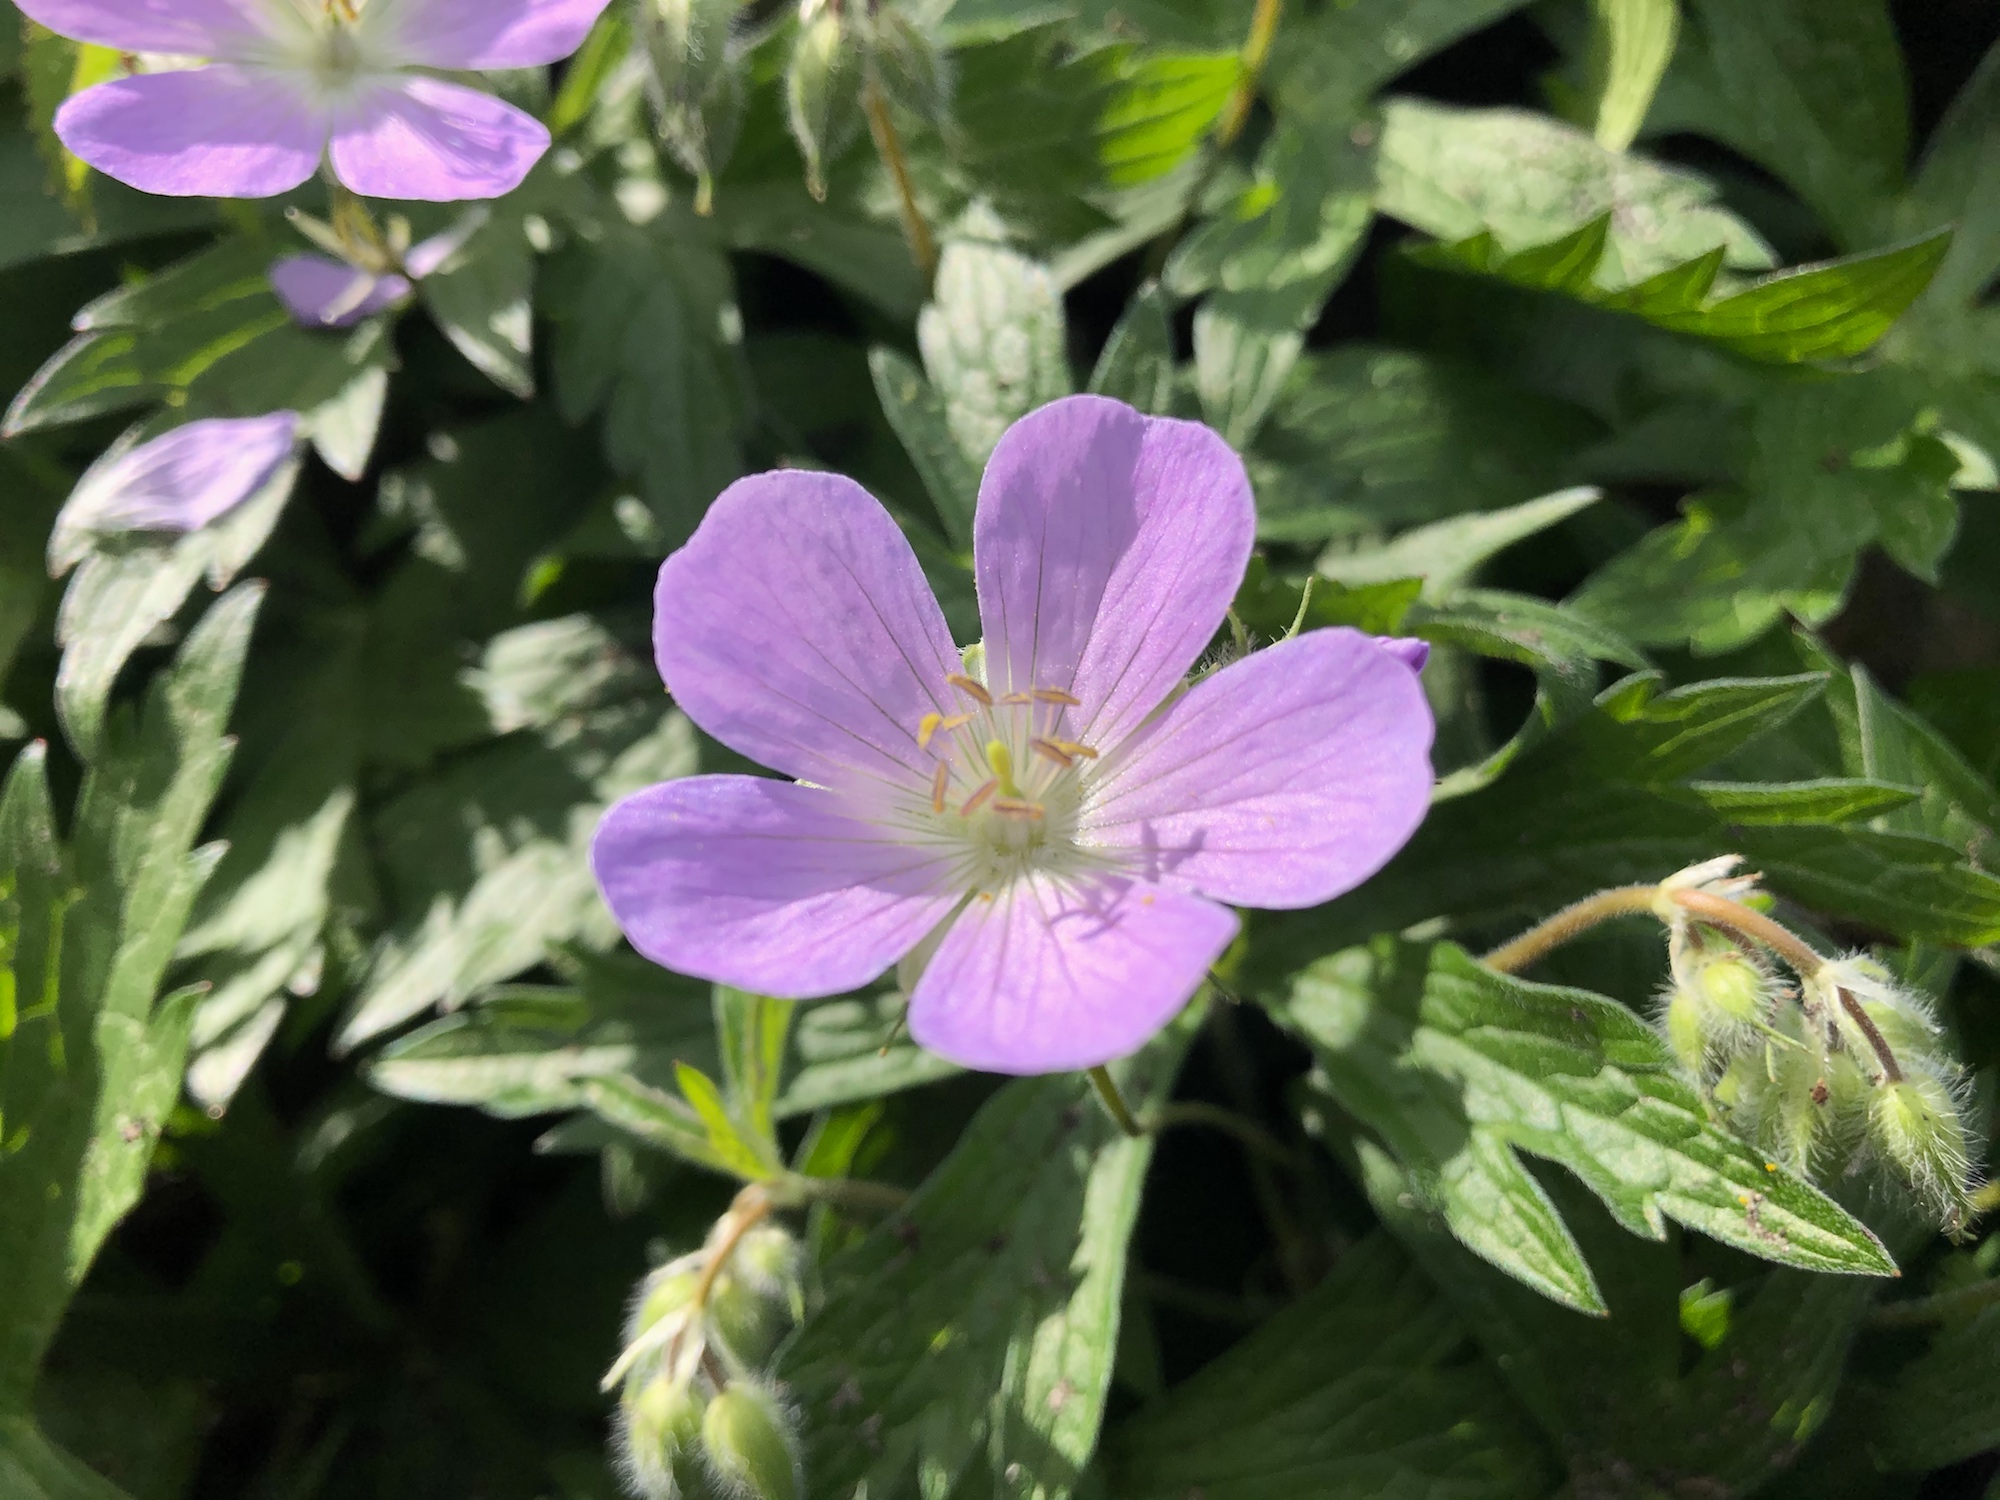 Wild Geranium by Council Ring in Oak Savanna on May 5, 2021.